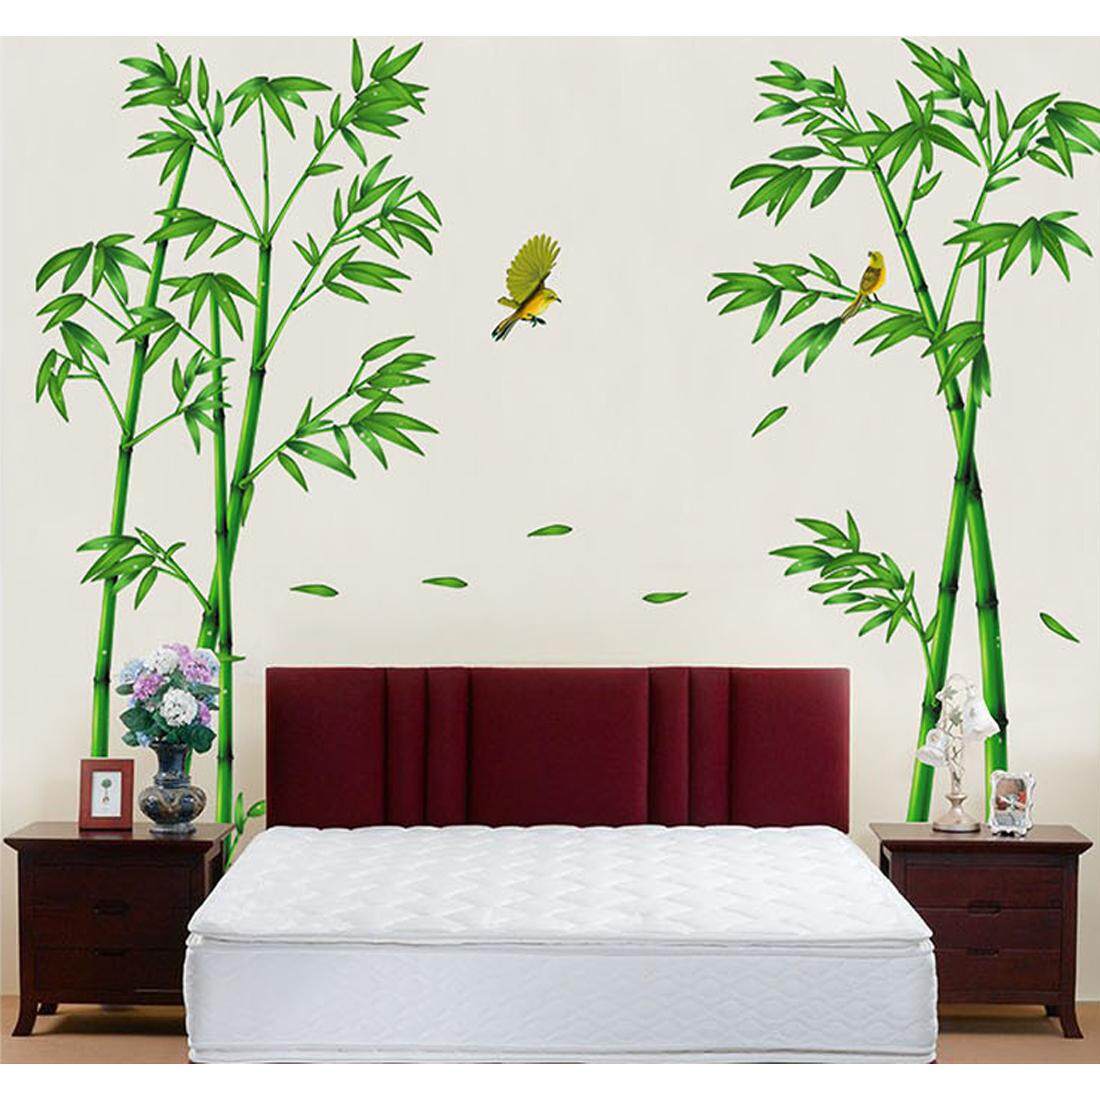 Green bamboo Bird PVC Wall Decals DIY Home Sticker WallPaper Vinyl Wall arts Pictures Removable Murals For House Decoration Baby Living Rooms Bedroom Toilet